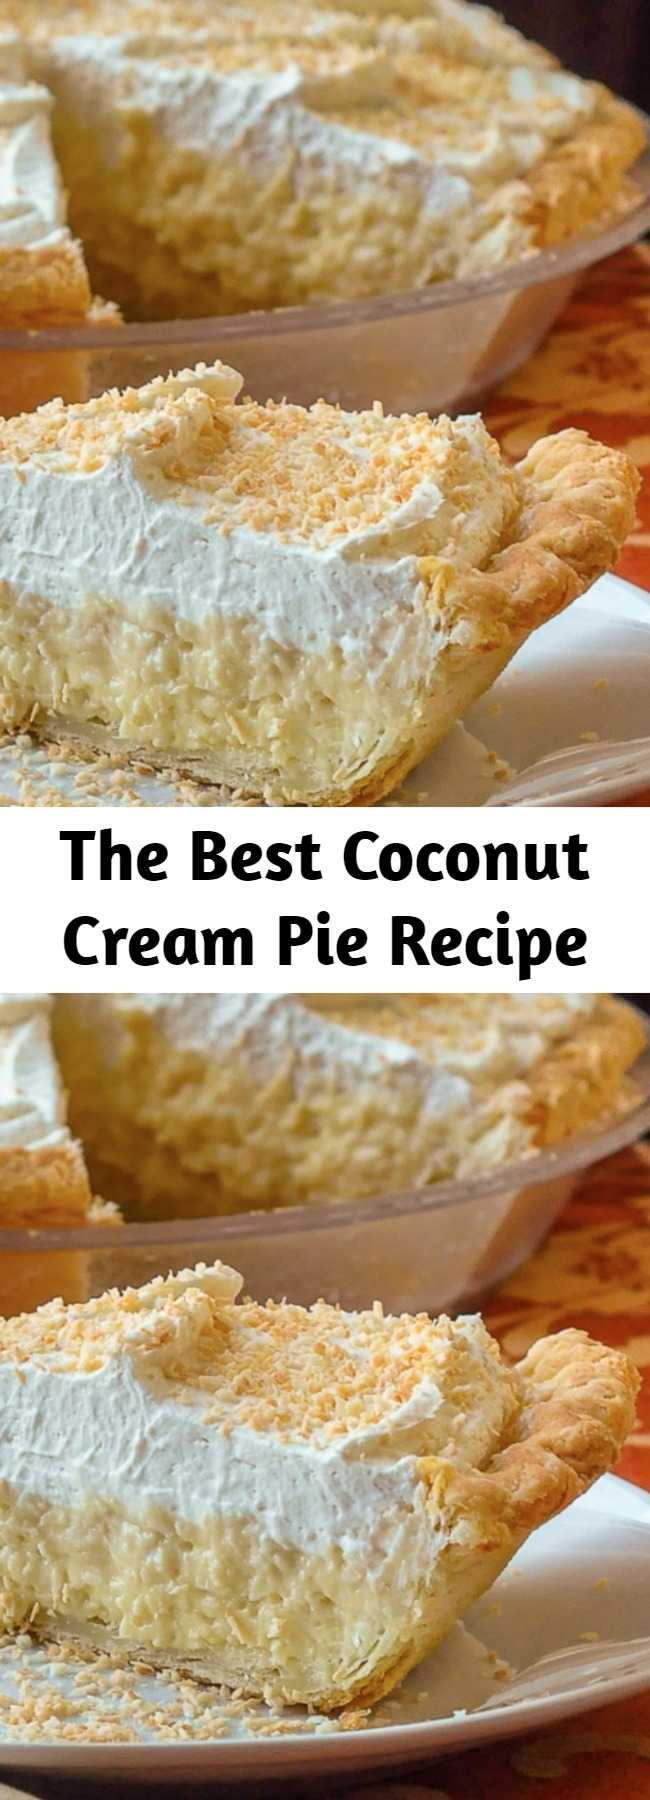 The Best Coconut Cream Pie Recipe - The Absolute Best Coconut Cream Pie. Truly the absolute best! A creamy, old-fashioned coconut cream pie recipe that this avid baker has used for over 30 years. I have never tasted a better recipe.